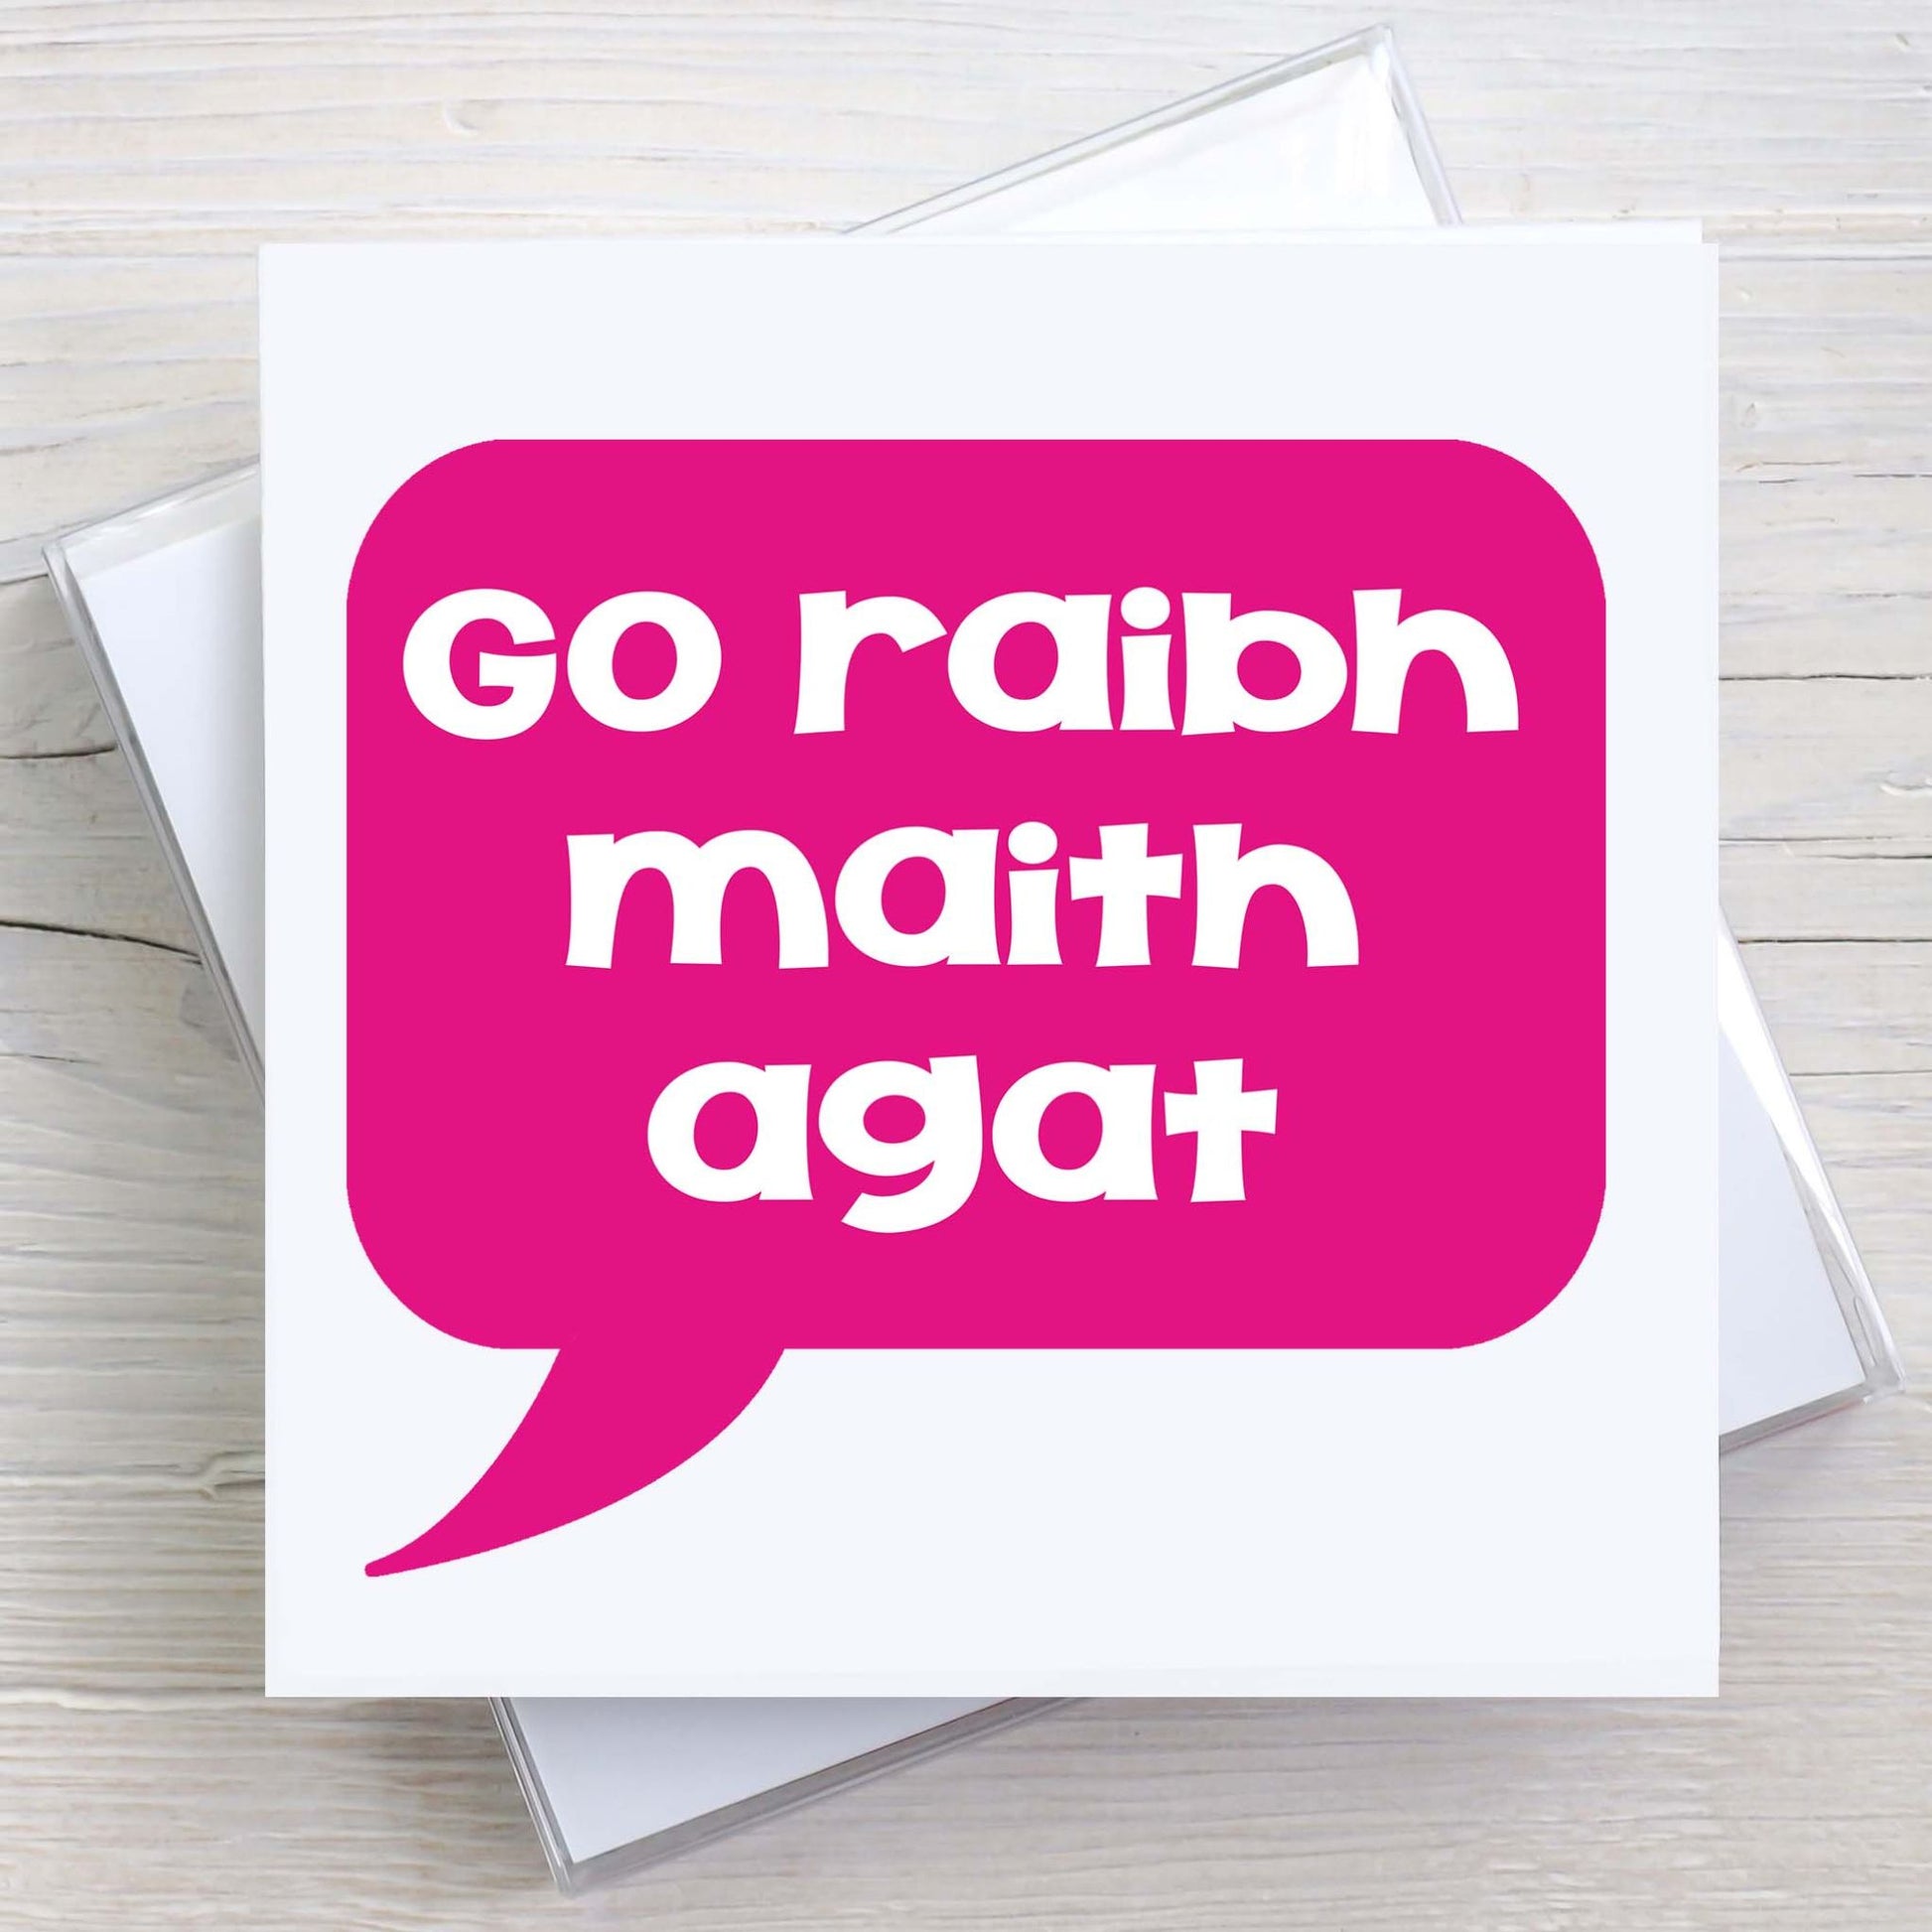 Irish greeting card with words Go Raibh Maith Agat written in a pink speech bubble.  Translates to Thank You, as gaeilge.